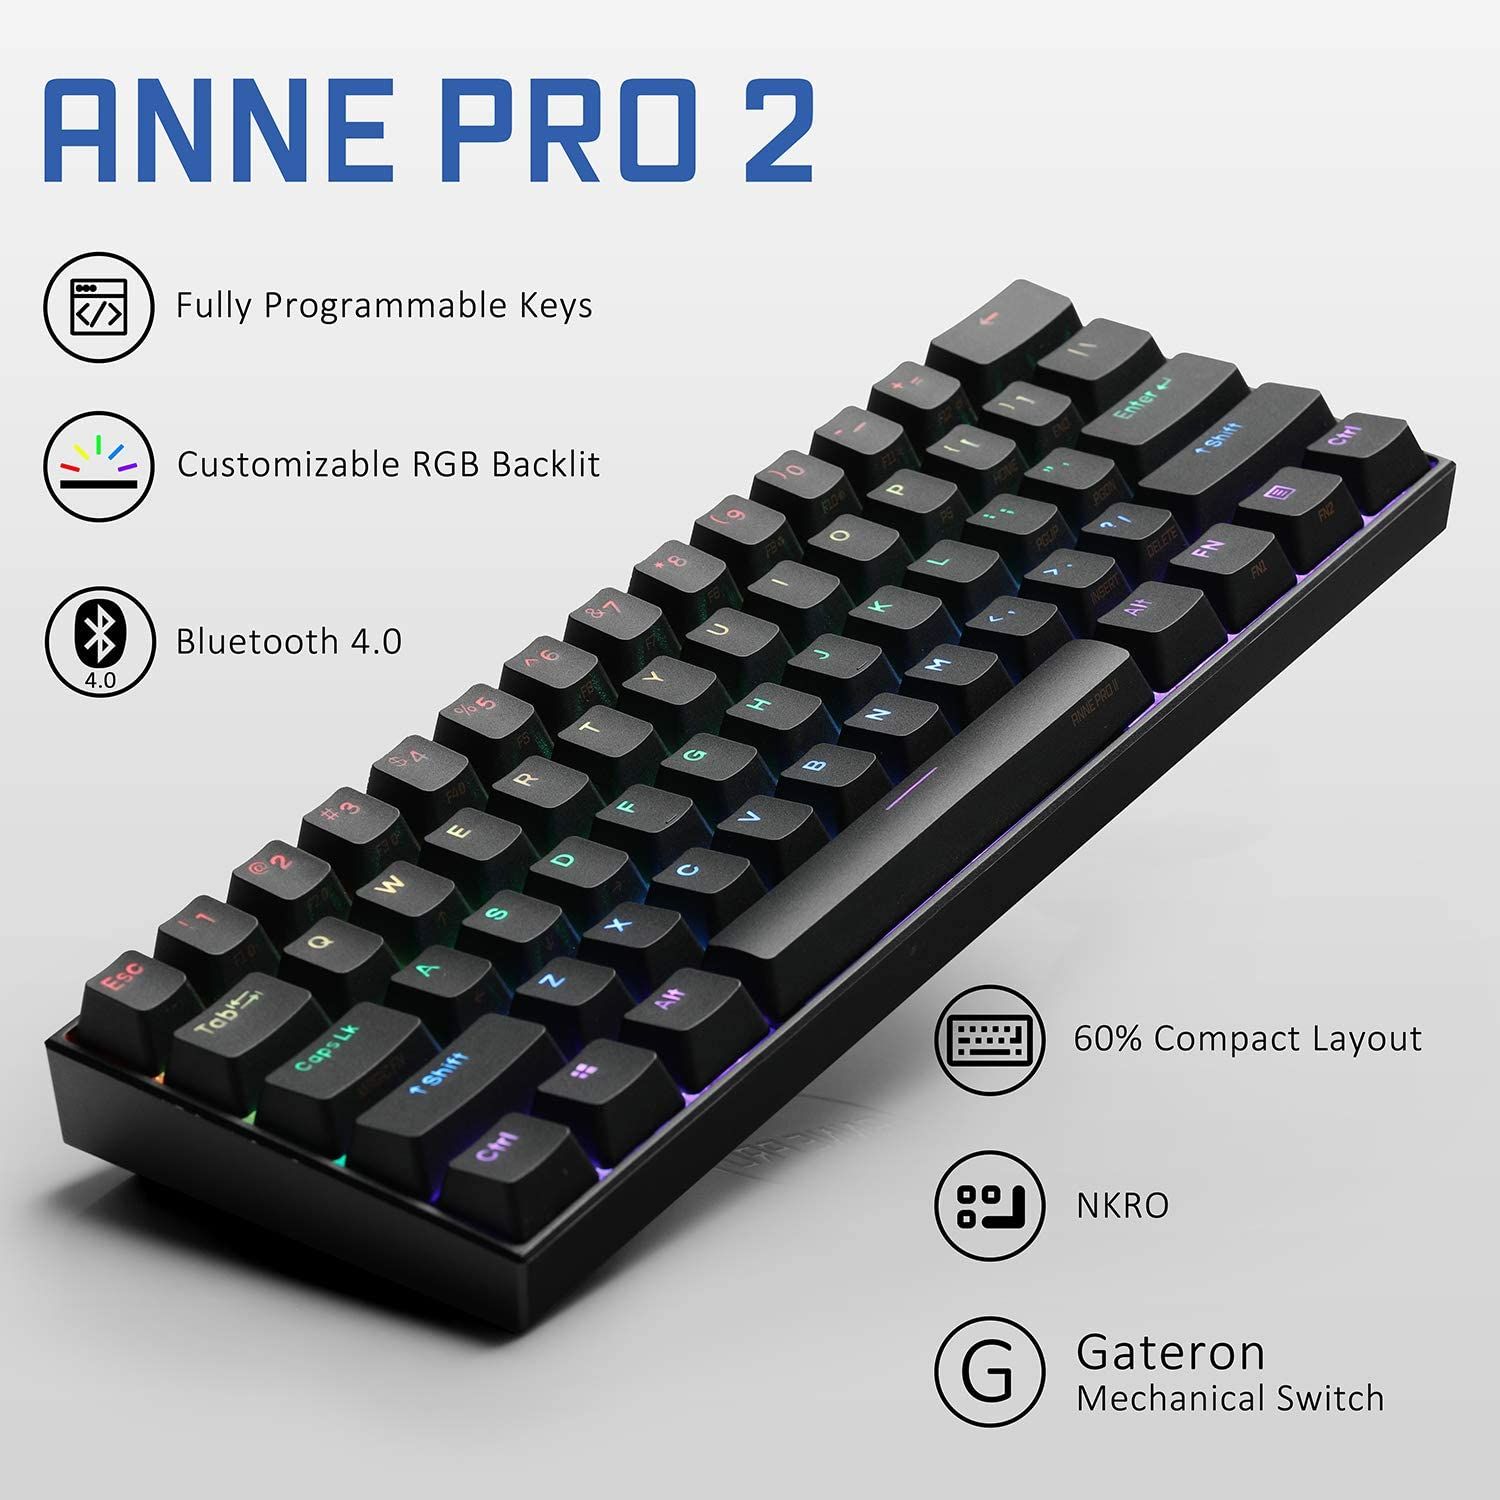 Anne Pro 2 with specifications listed